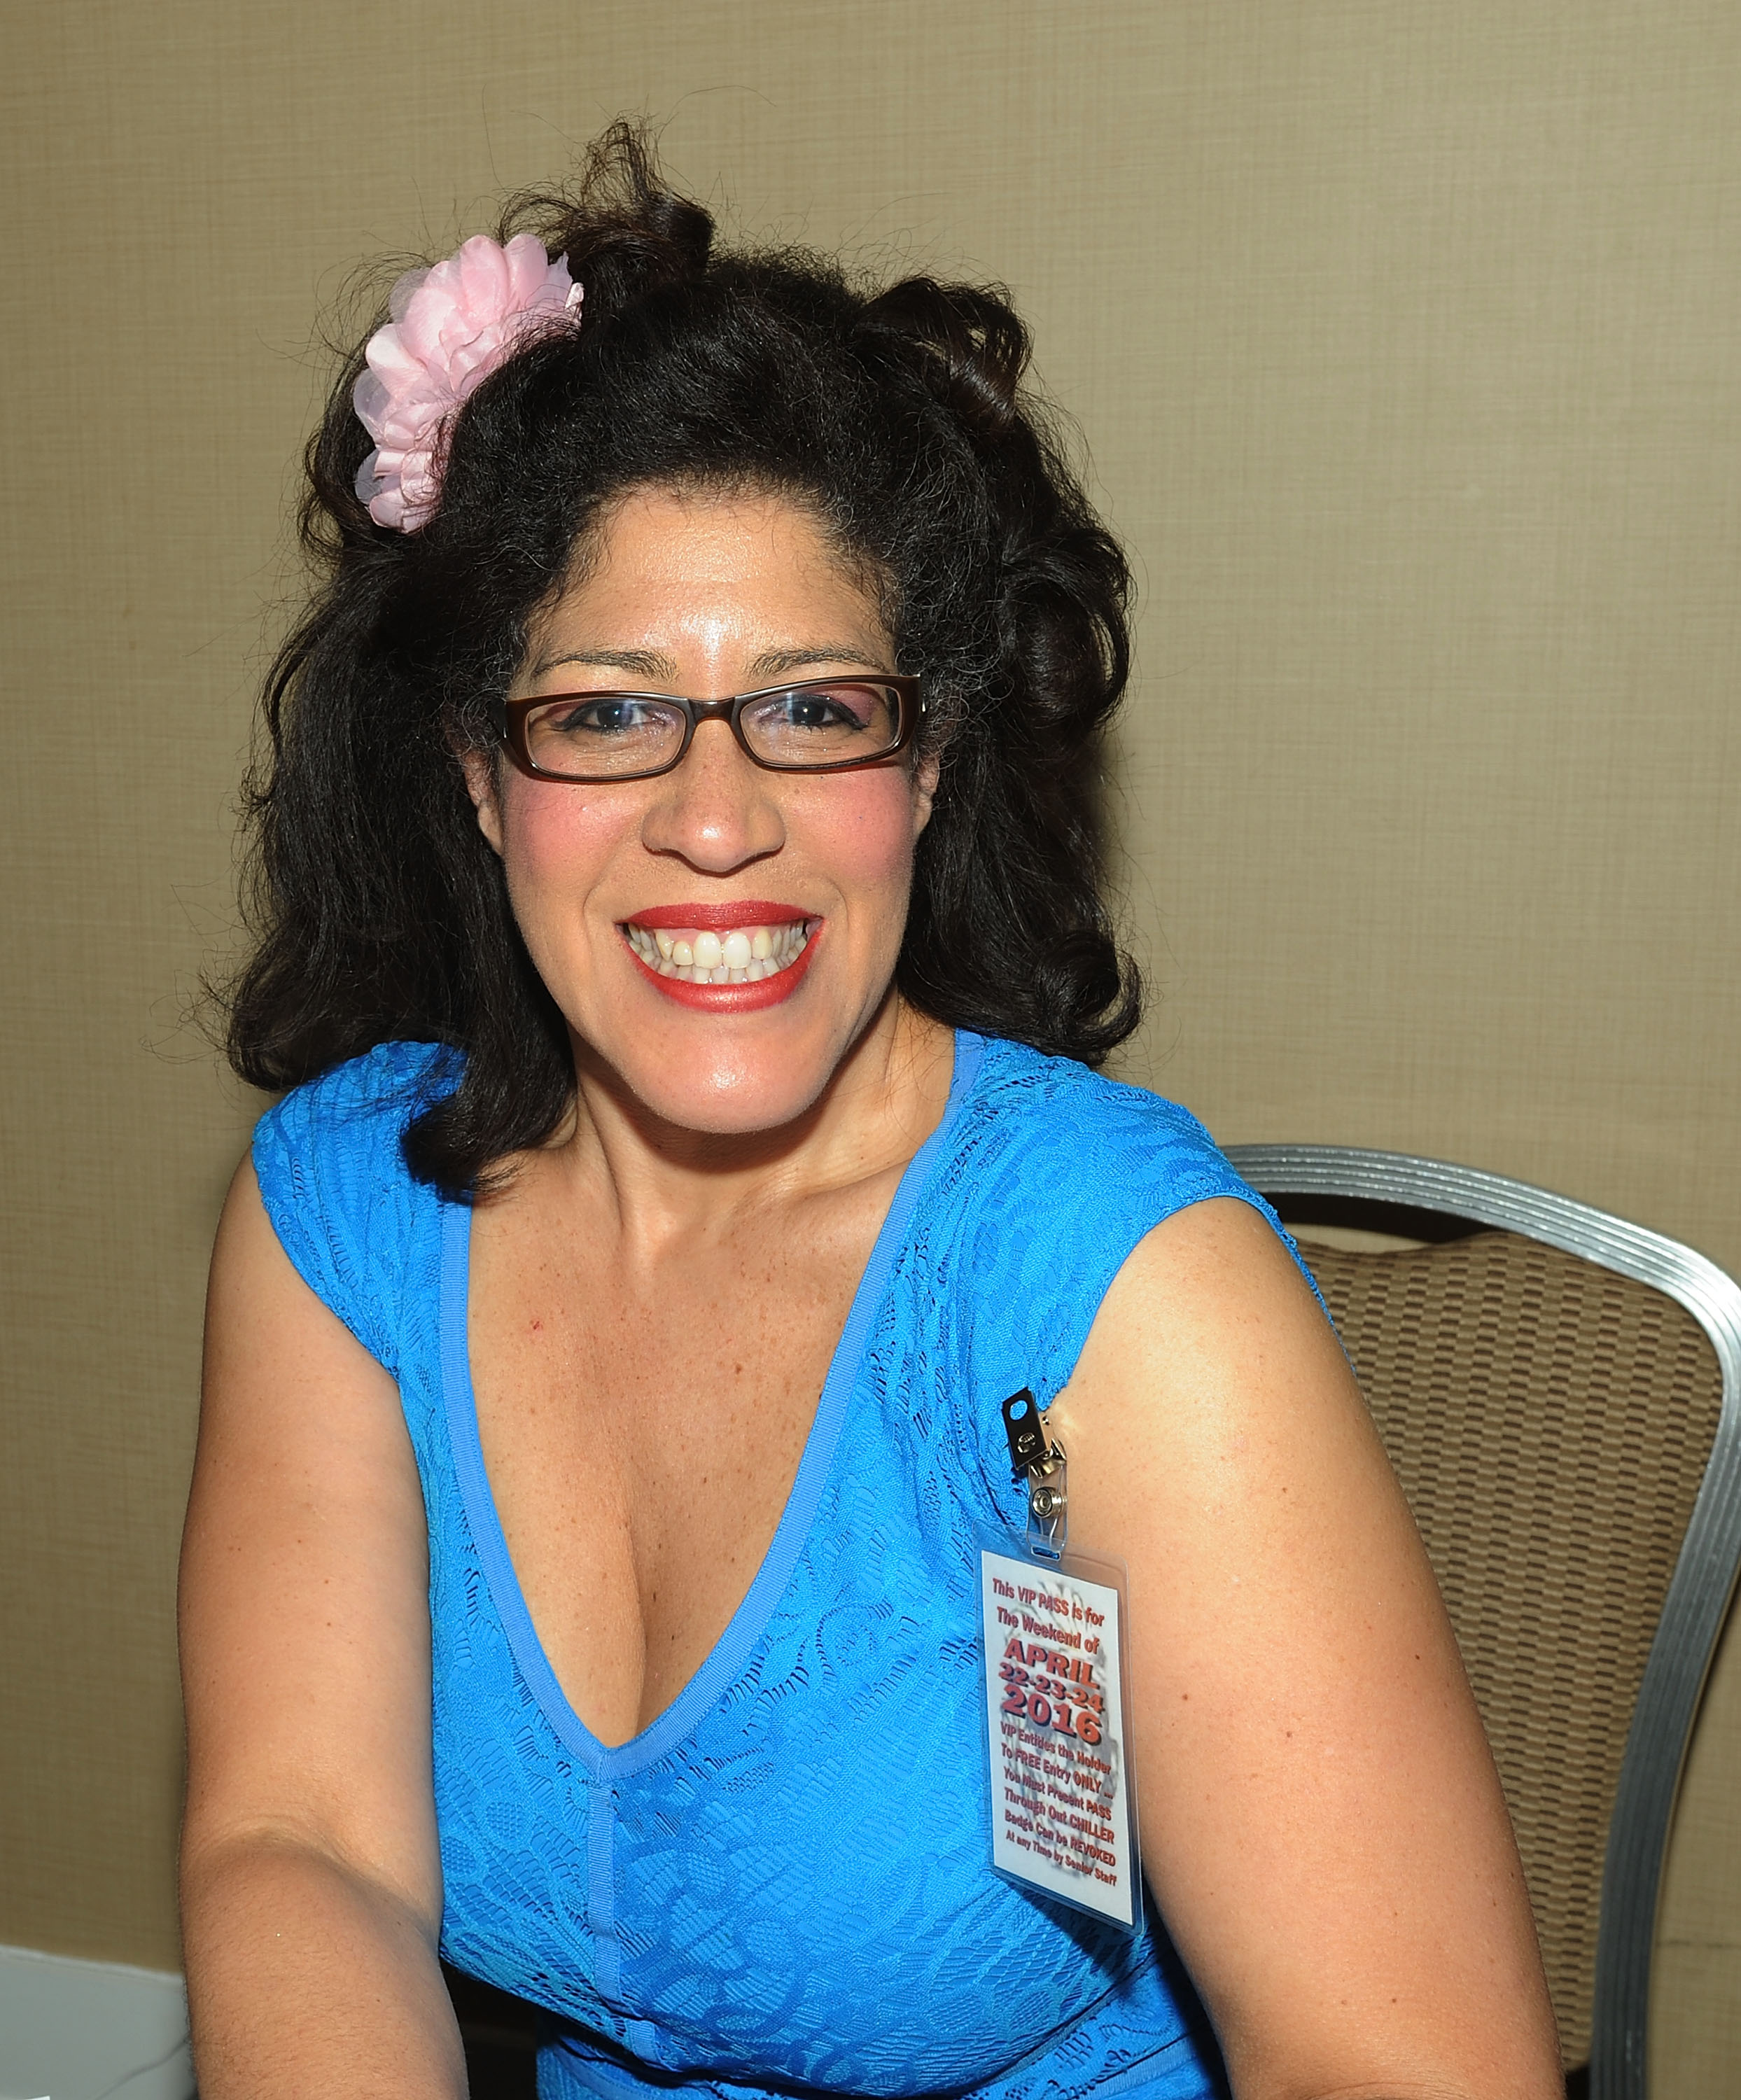 Rain Pryor attends the 2016 Chiller Theater Expo at Parsippany Hilton on April 22, 2016, in Parsippany, New Jersey. | Source: Getty Images